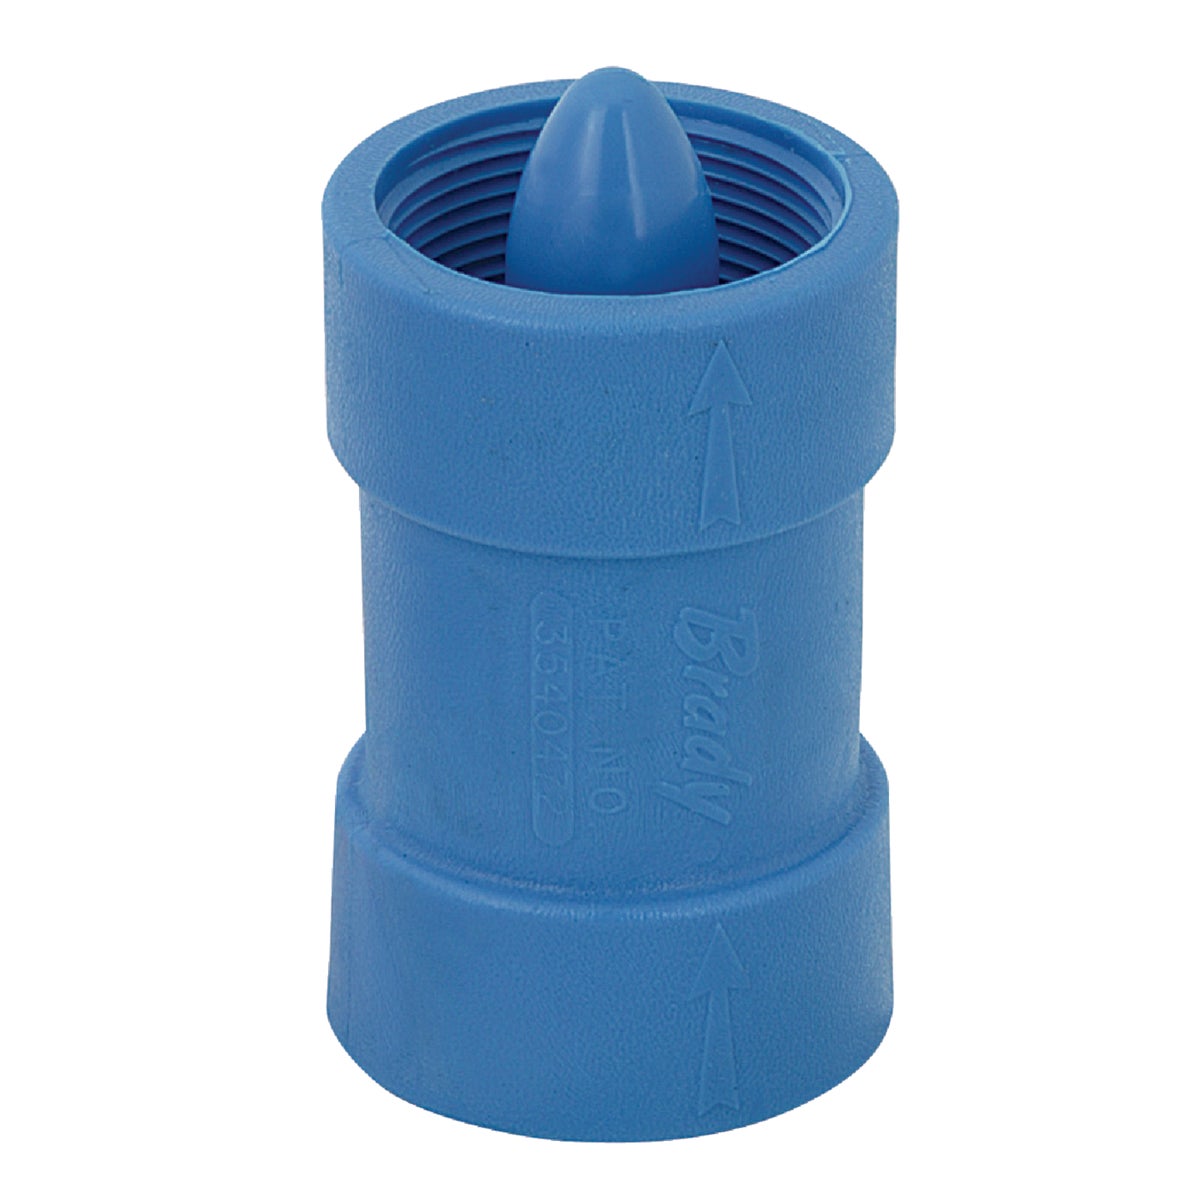 Campbell Brady 1-1/2 In. Acetal Polymer Spring Loaded Check Valve